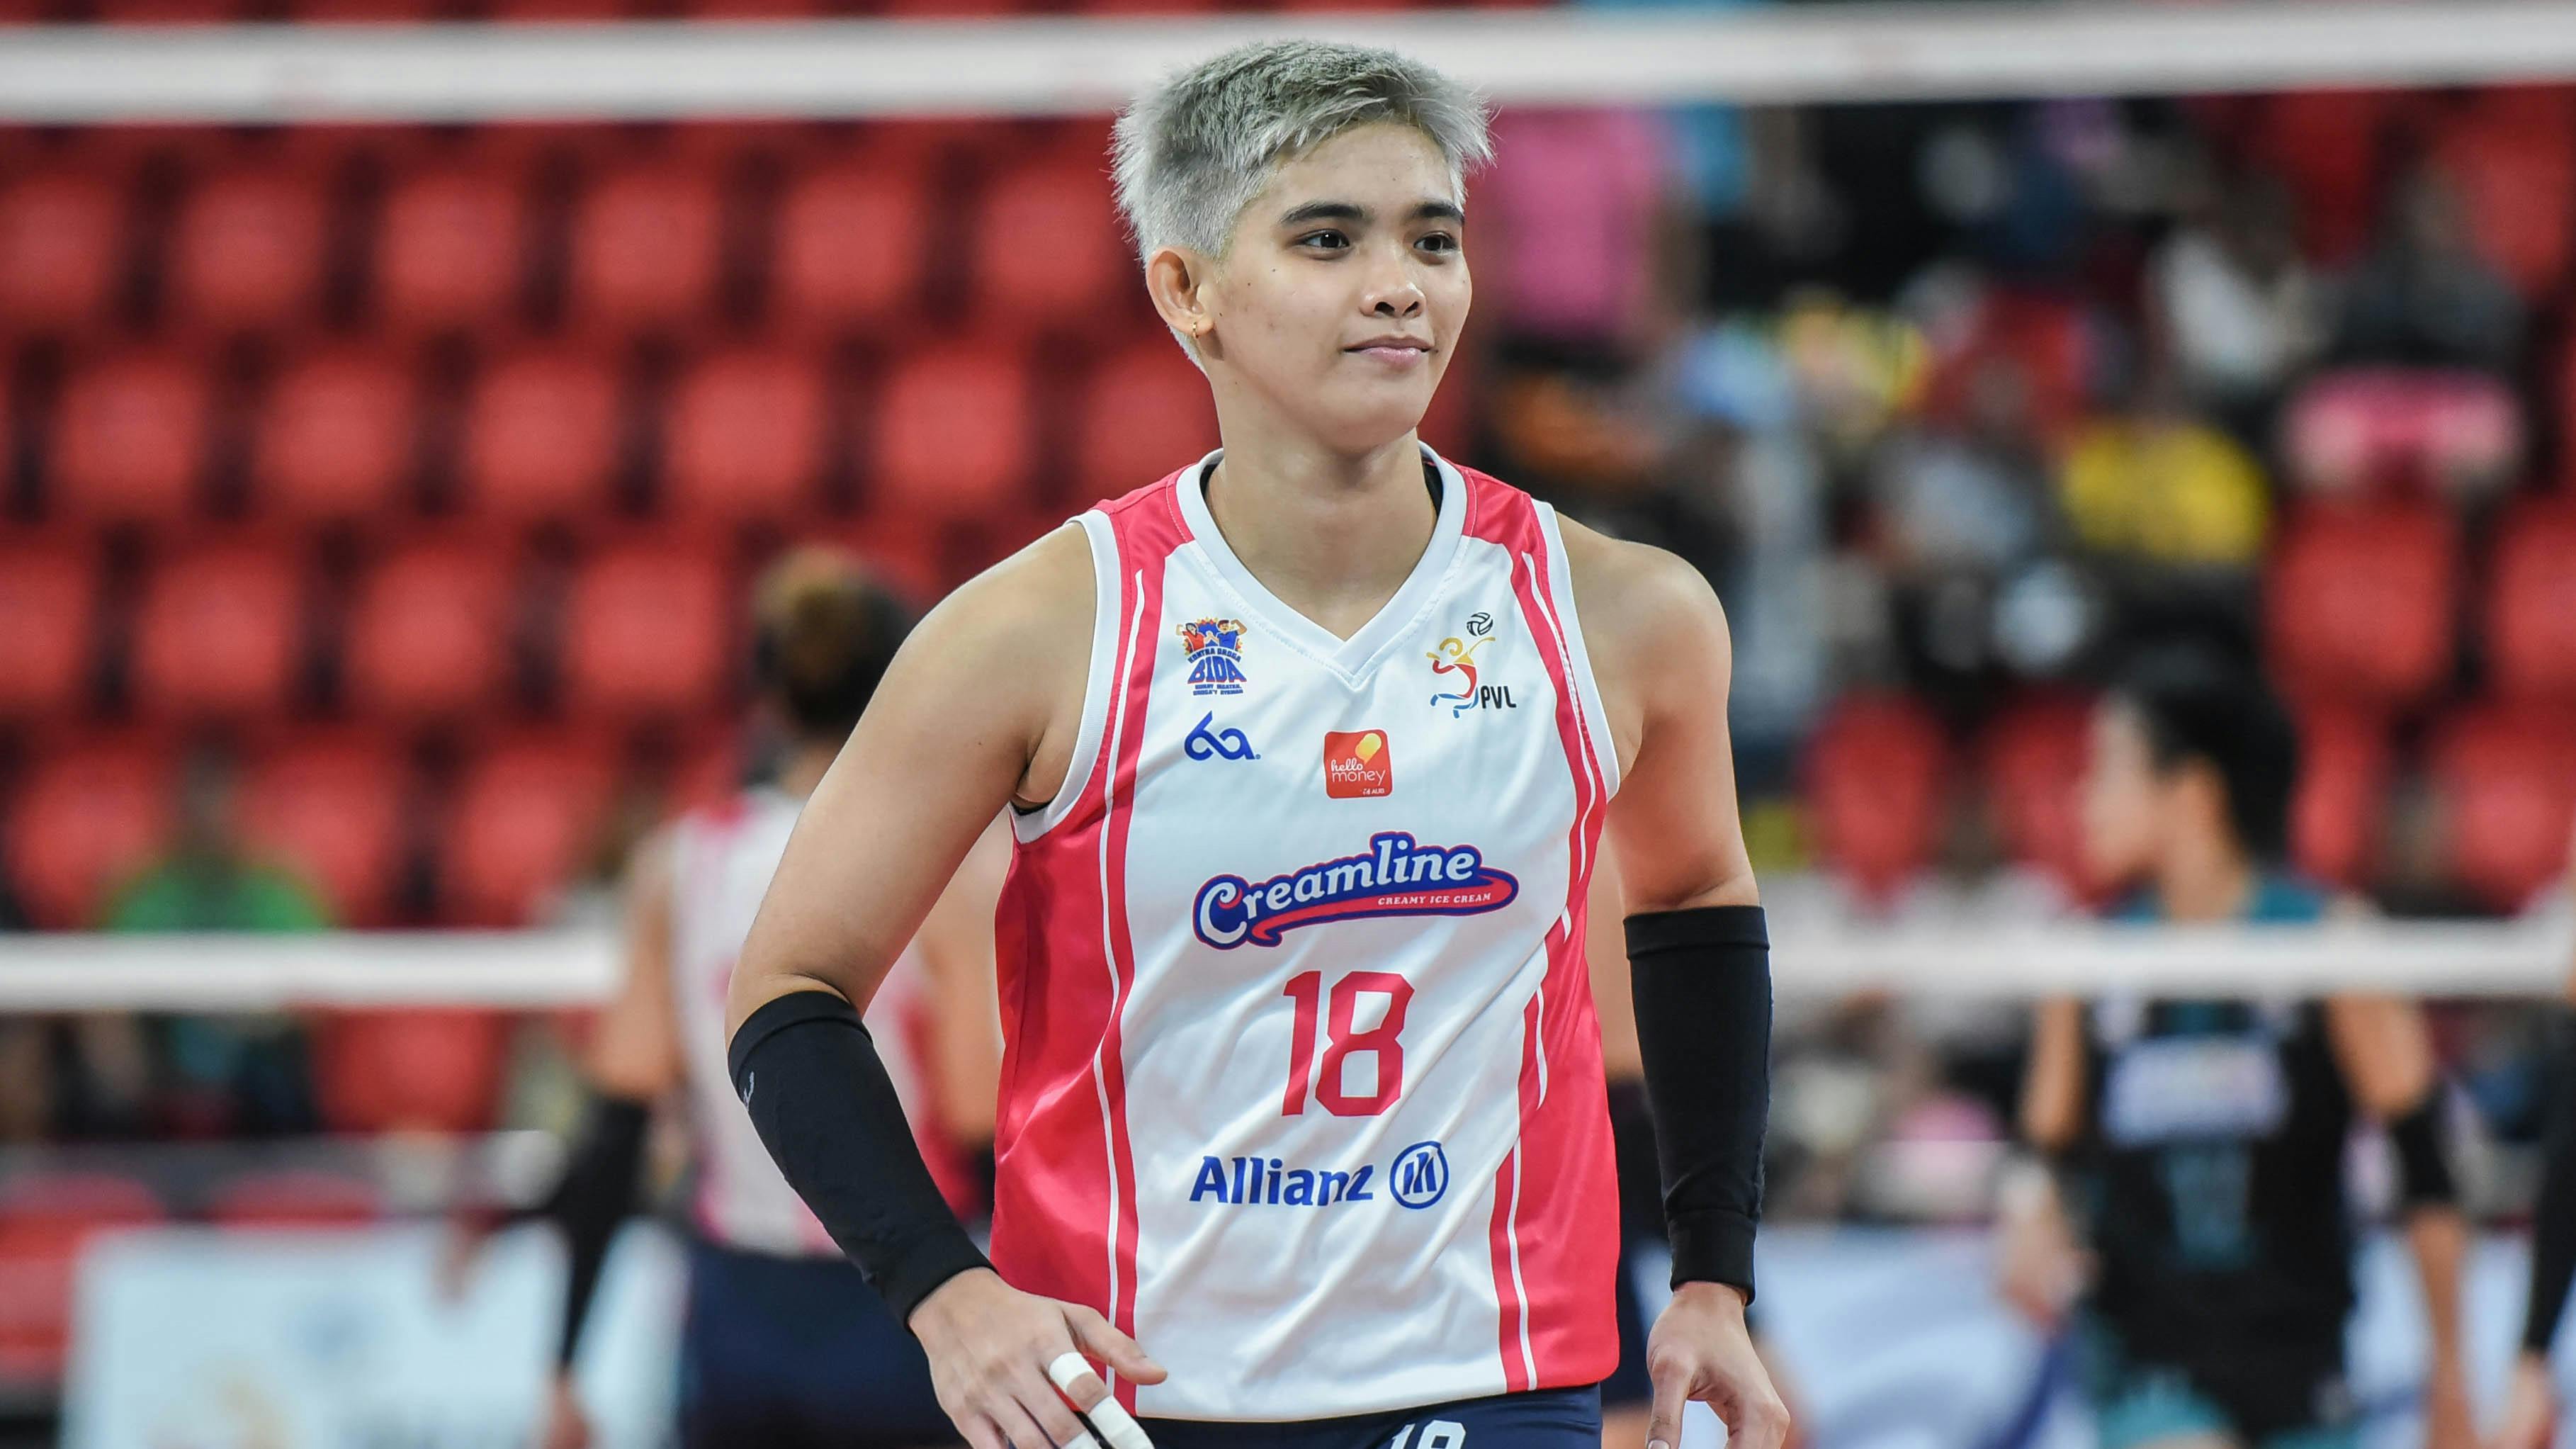 Jack of all trades: The different personas of Creamline star Tots Carlos